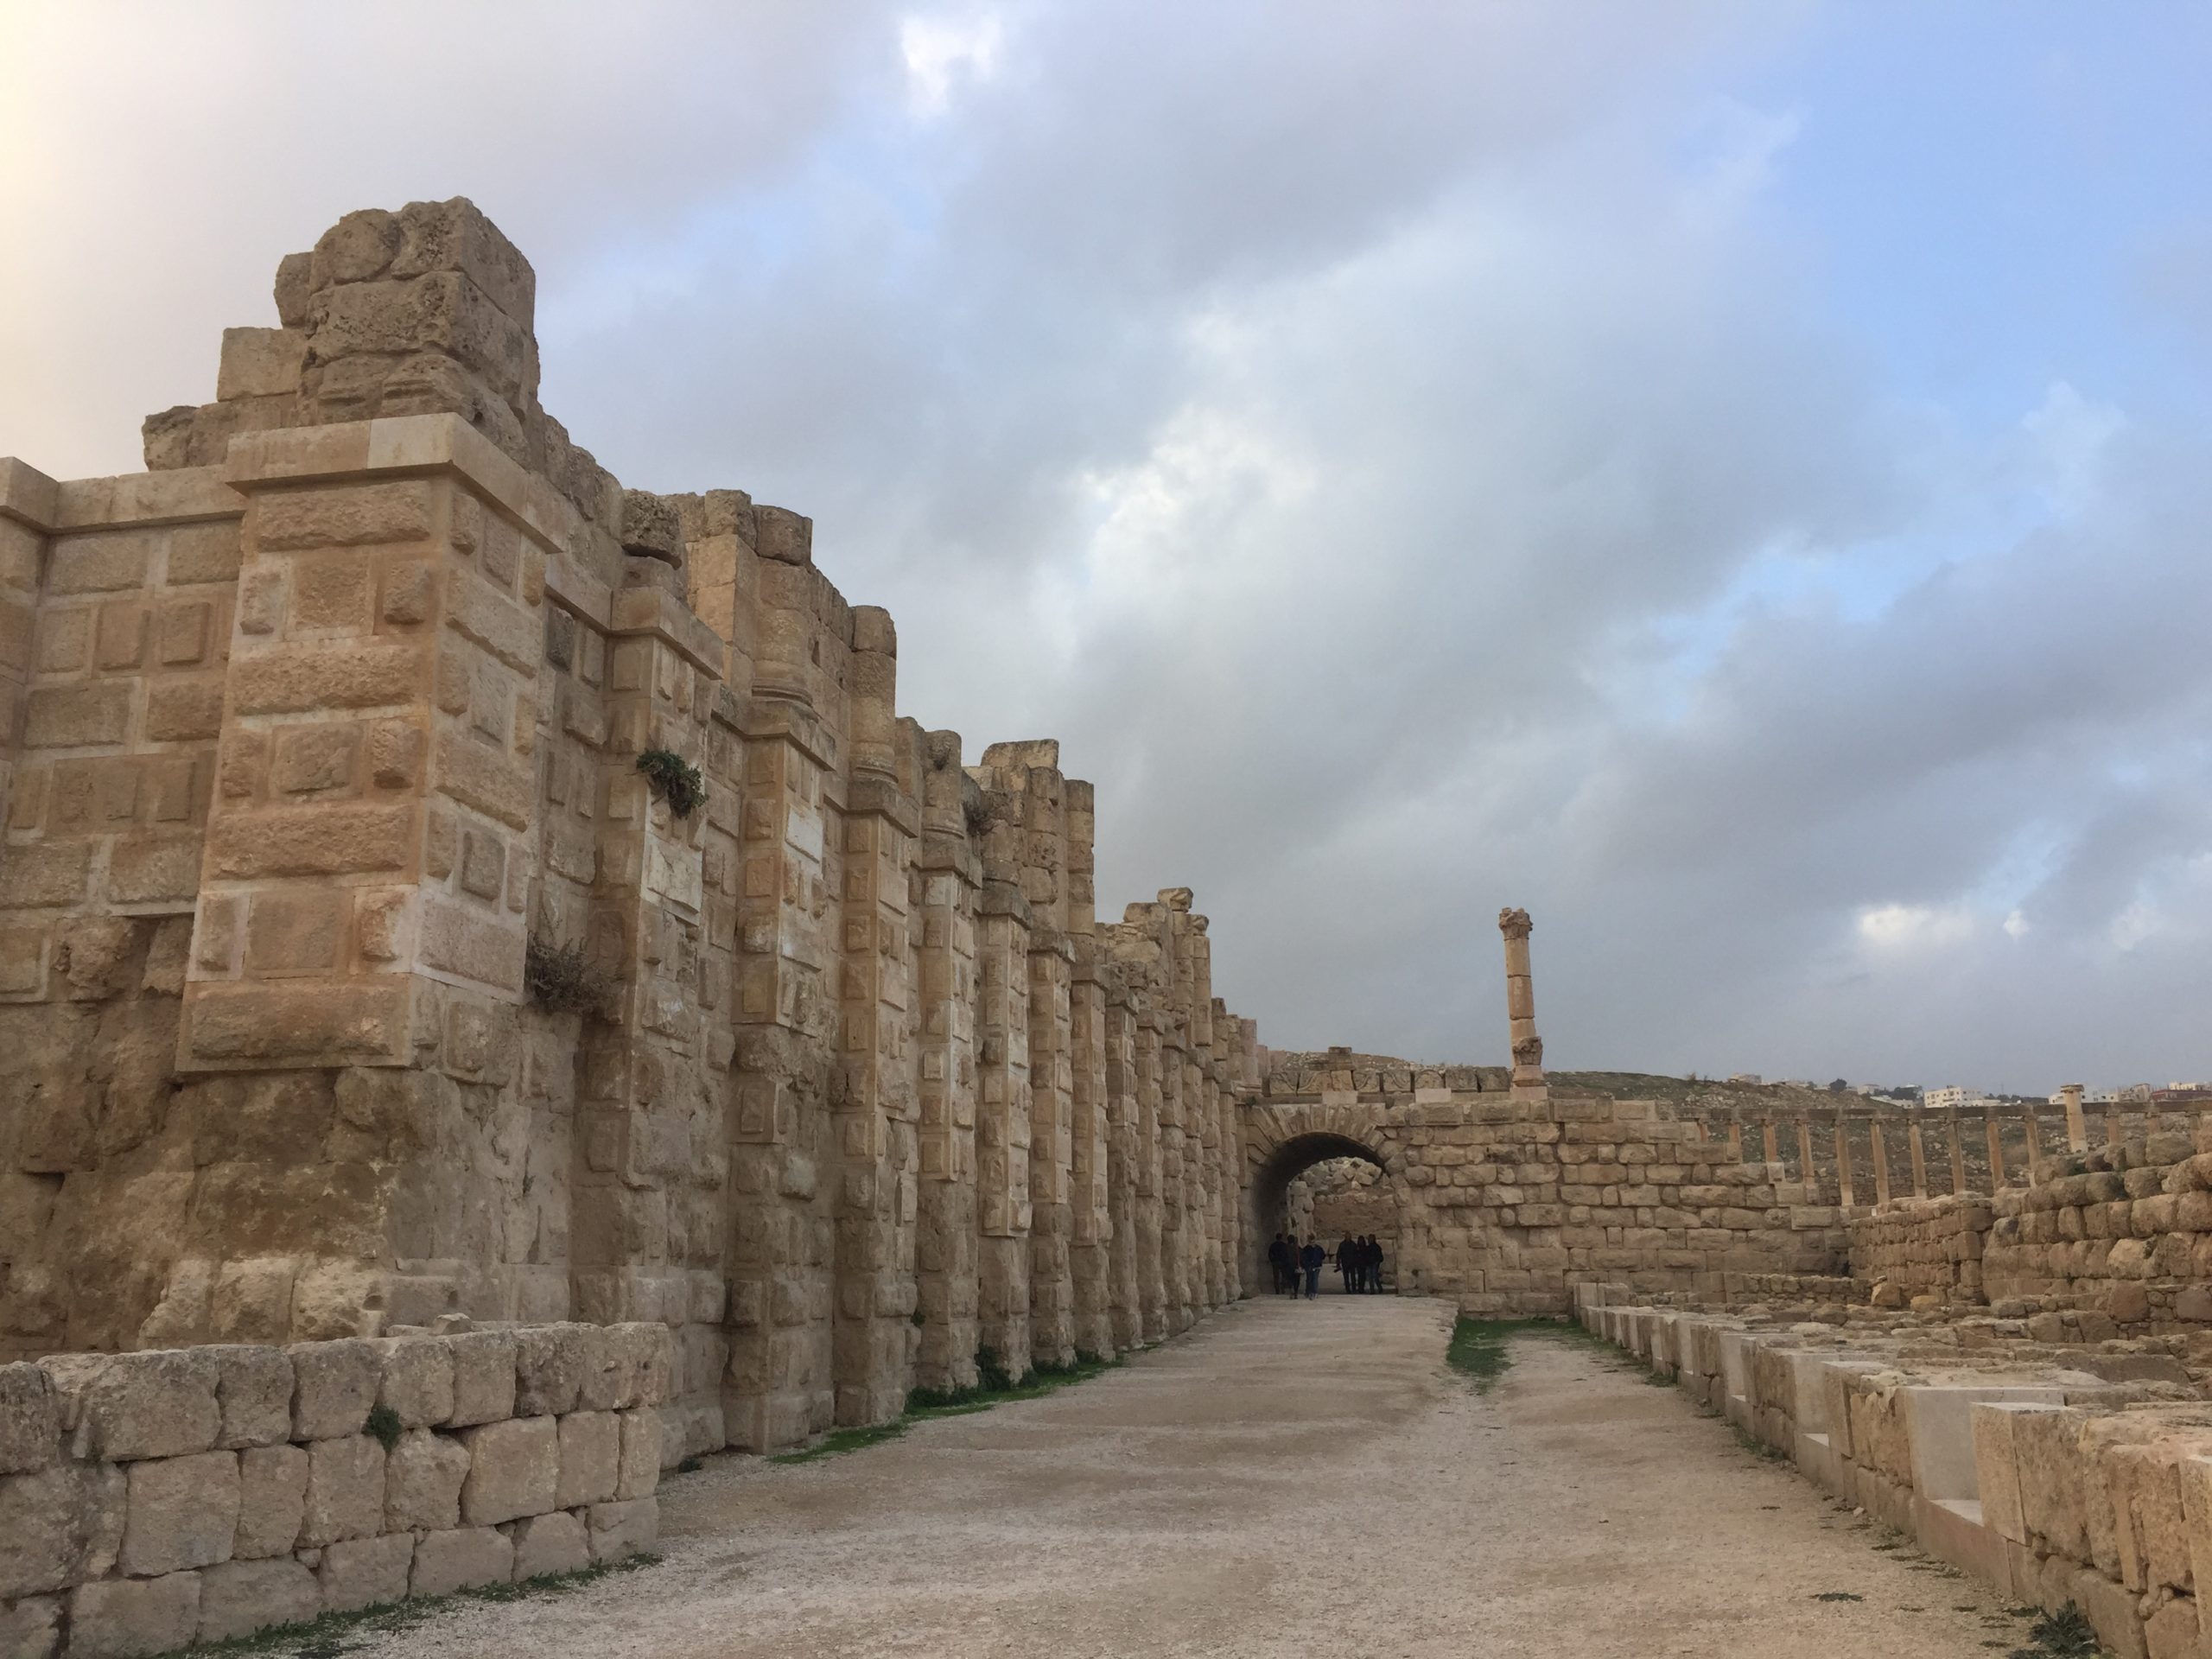 Walking in the old streets of Jerash